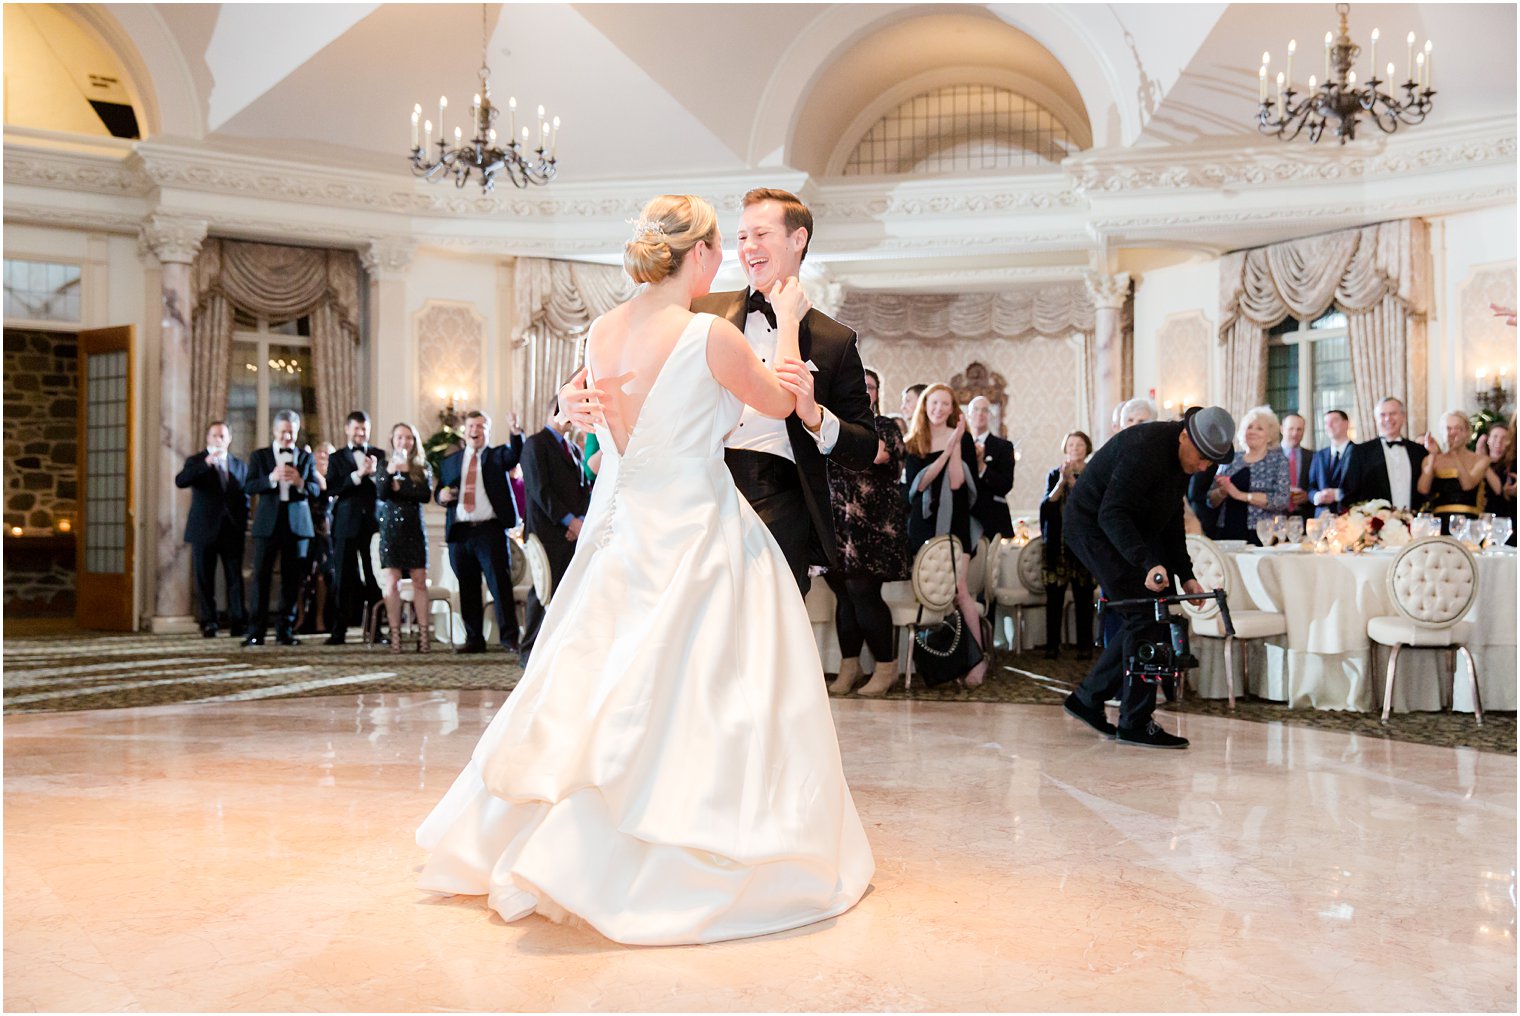 fun first dance photo at Pleasantdale Chateau